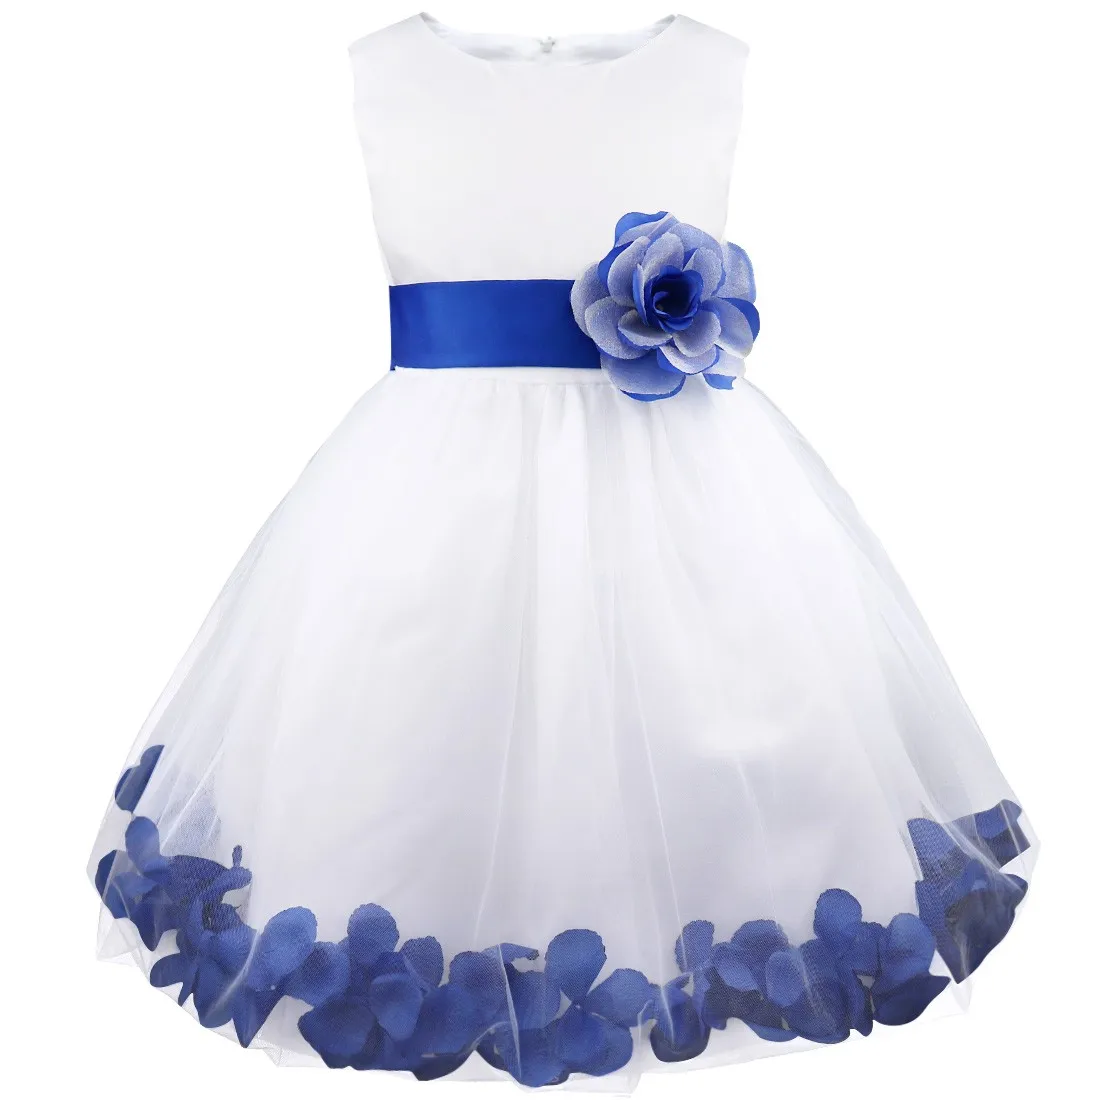 

Kids Wedding Flower Girls Dress Elegant Tulle Princess Dress Ball Gown Formal Tutu for Birthday Party Pageant Bridesmaid Prom